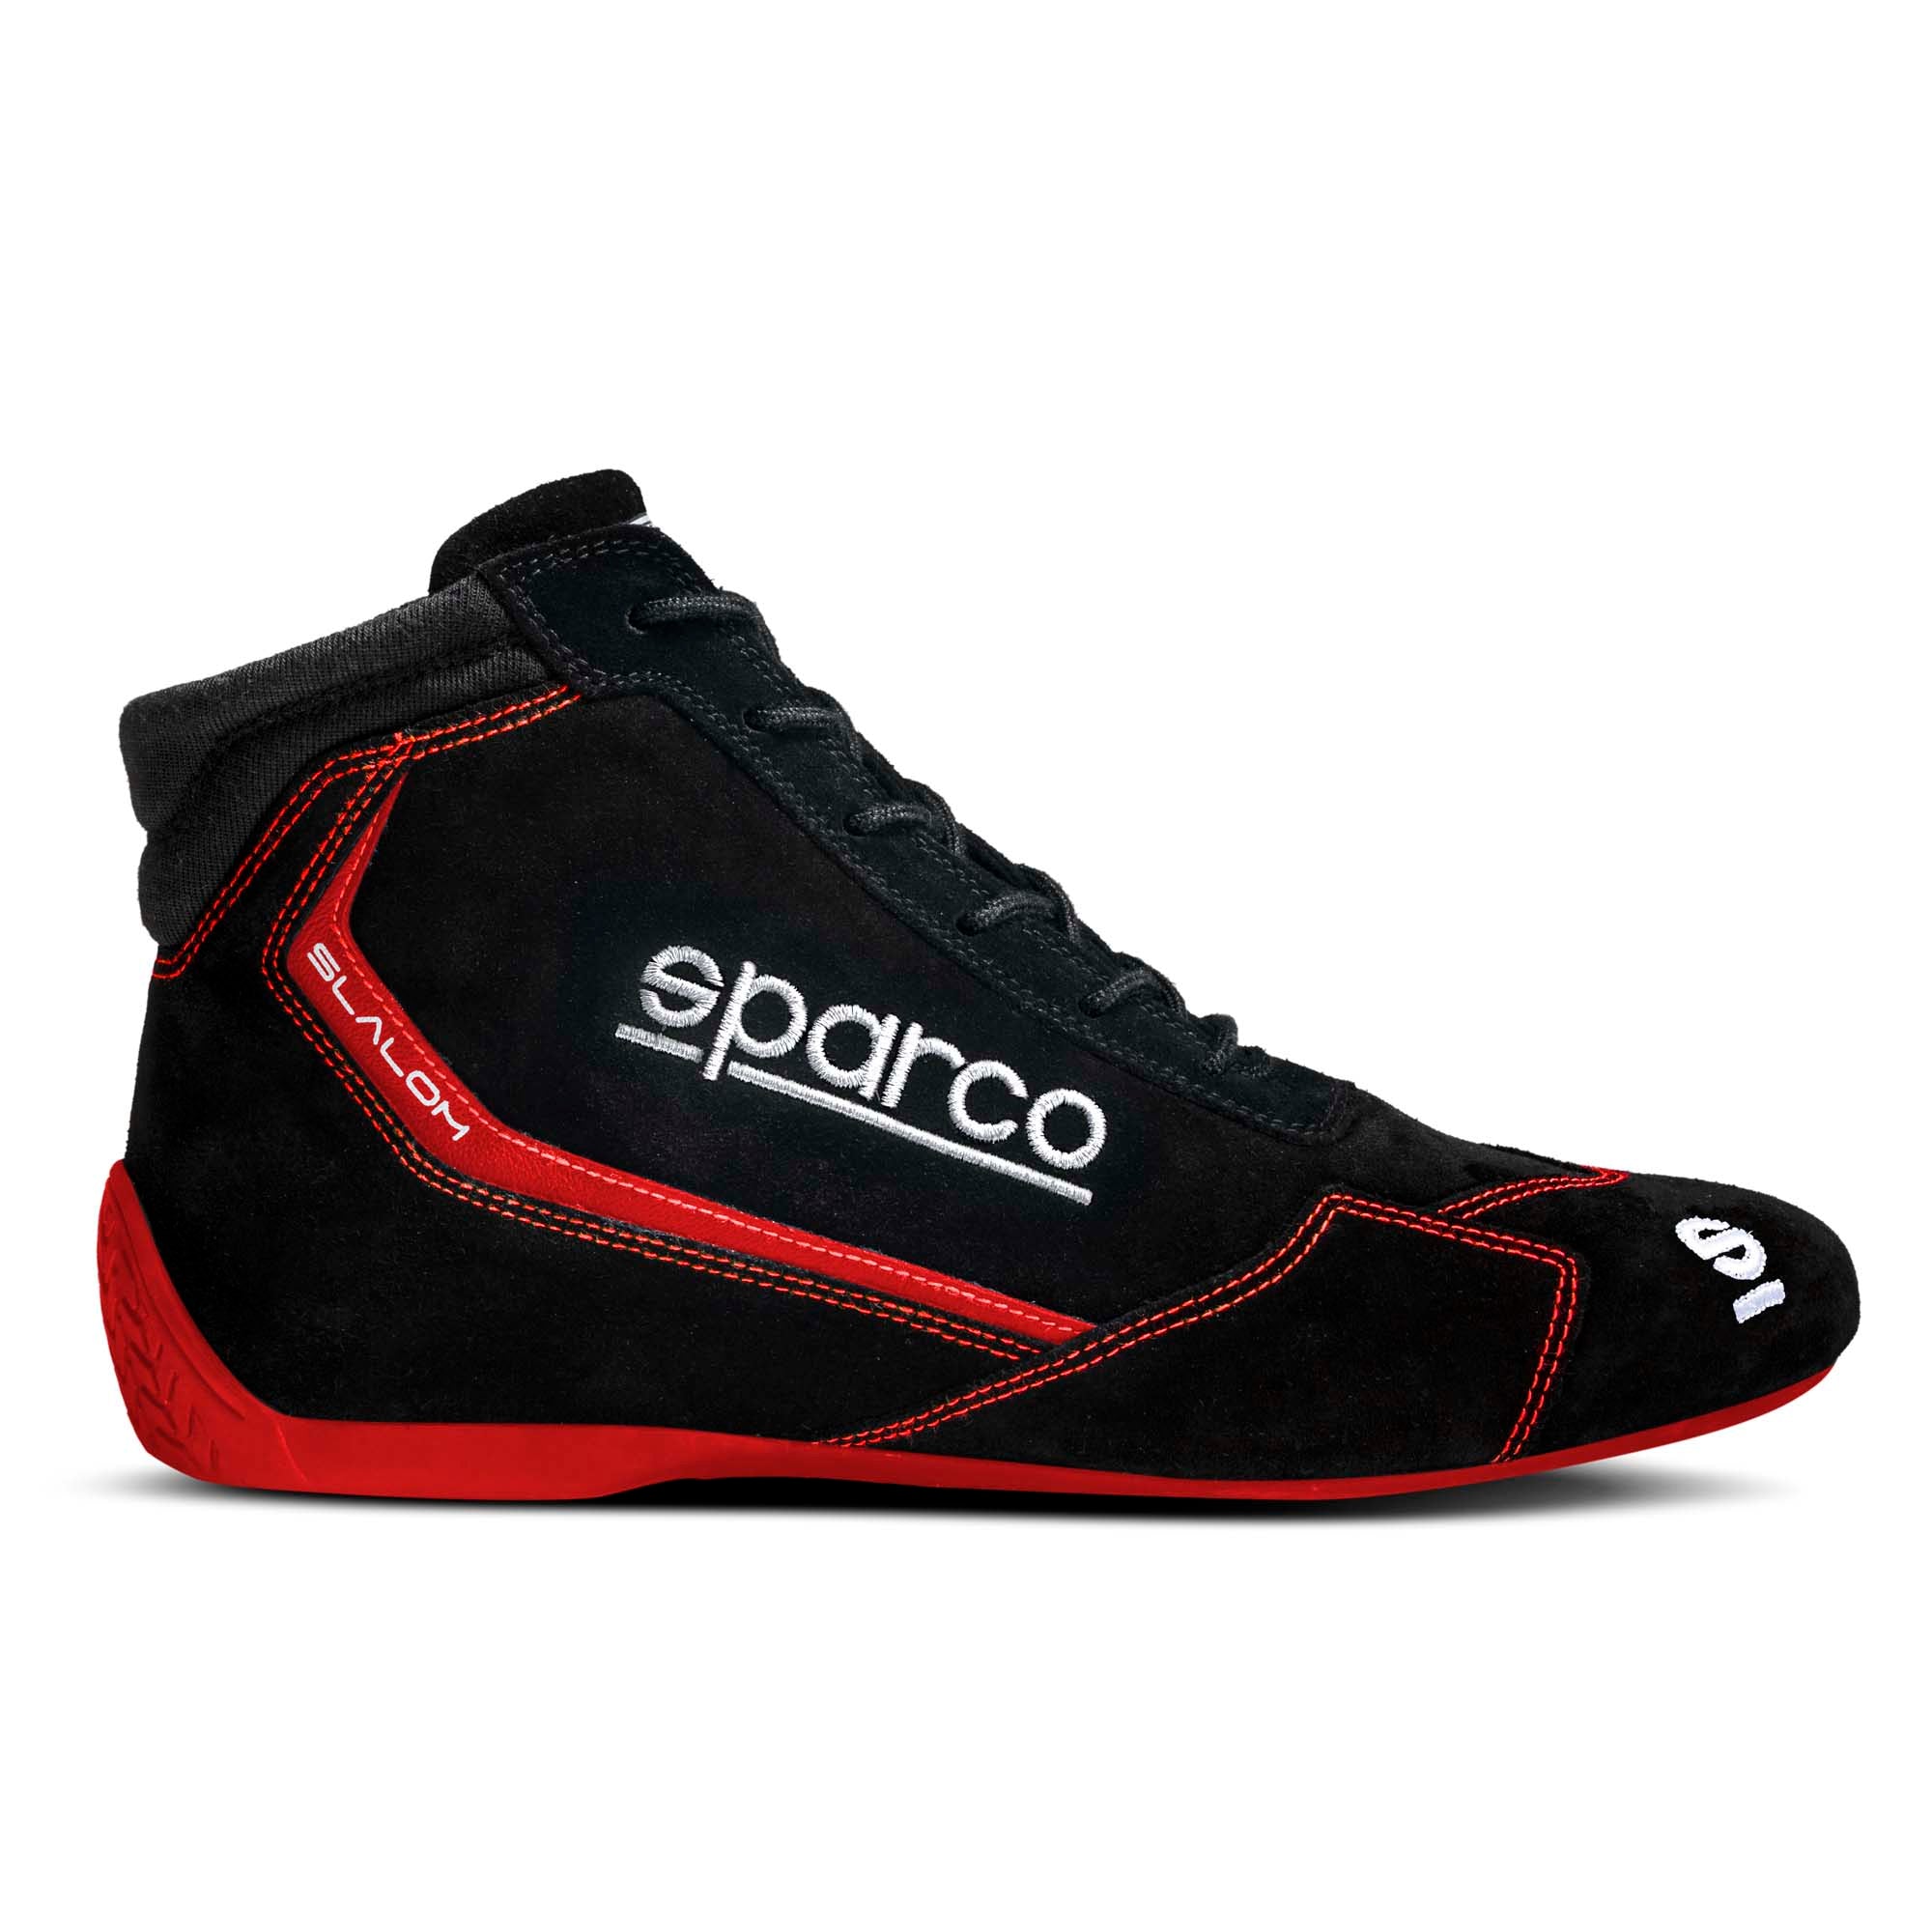 Sparco Slalom Racing Shoes - Black/Red